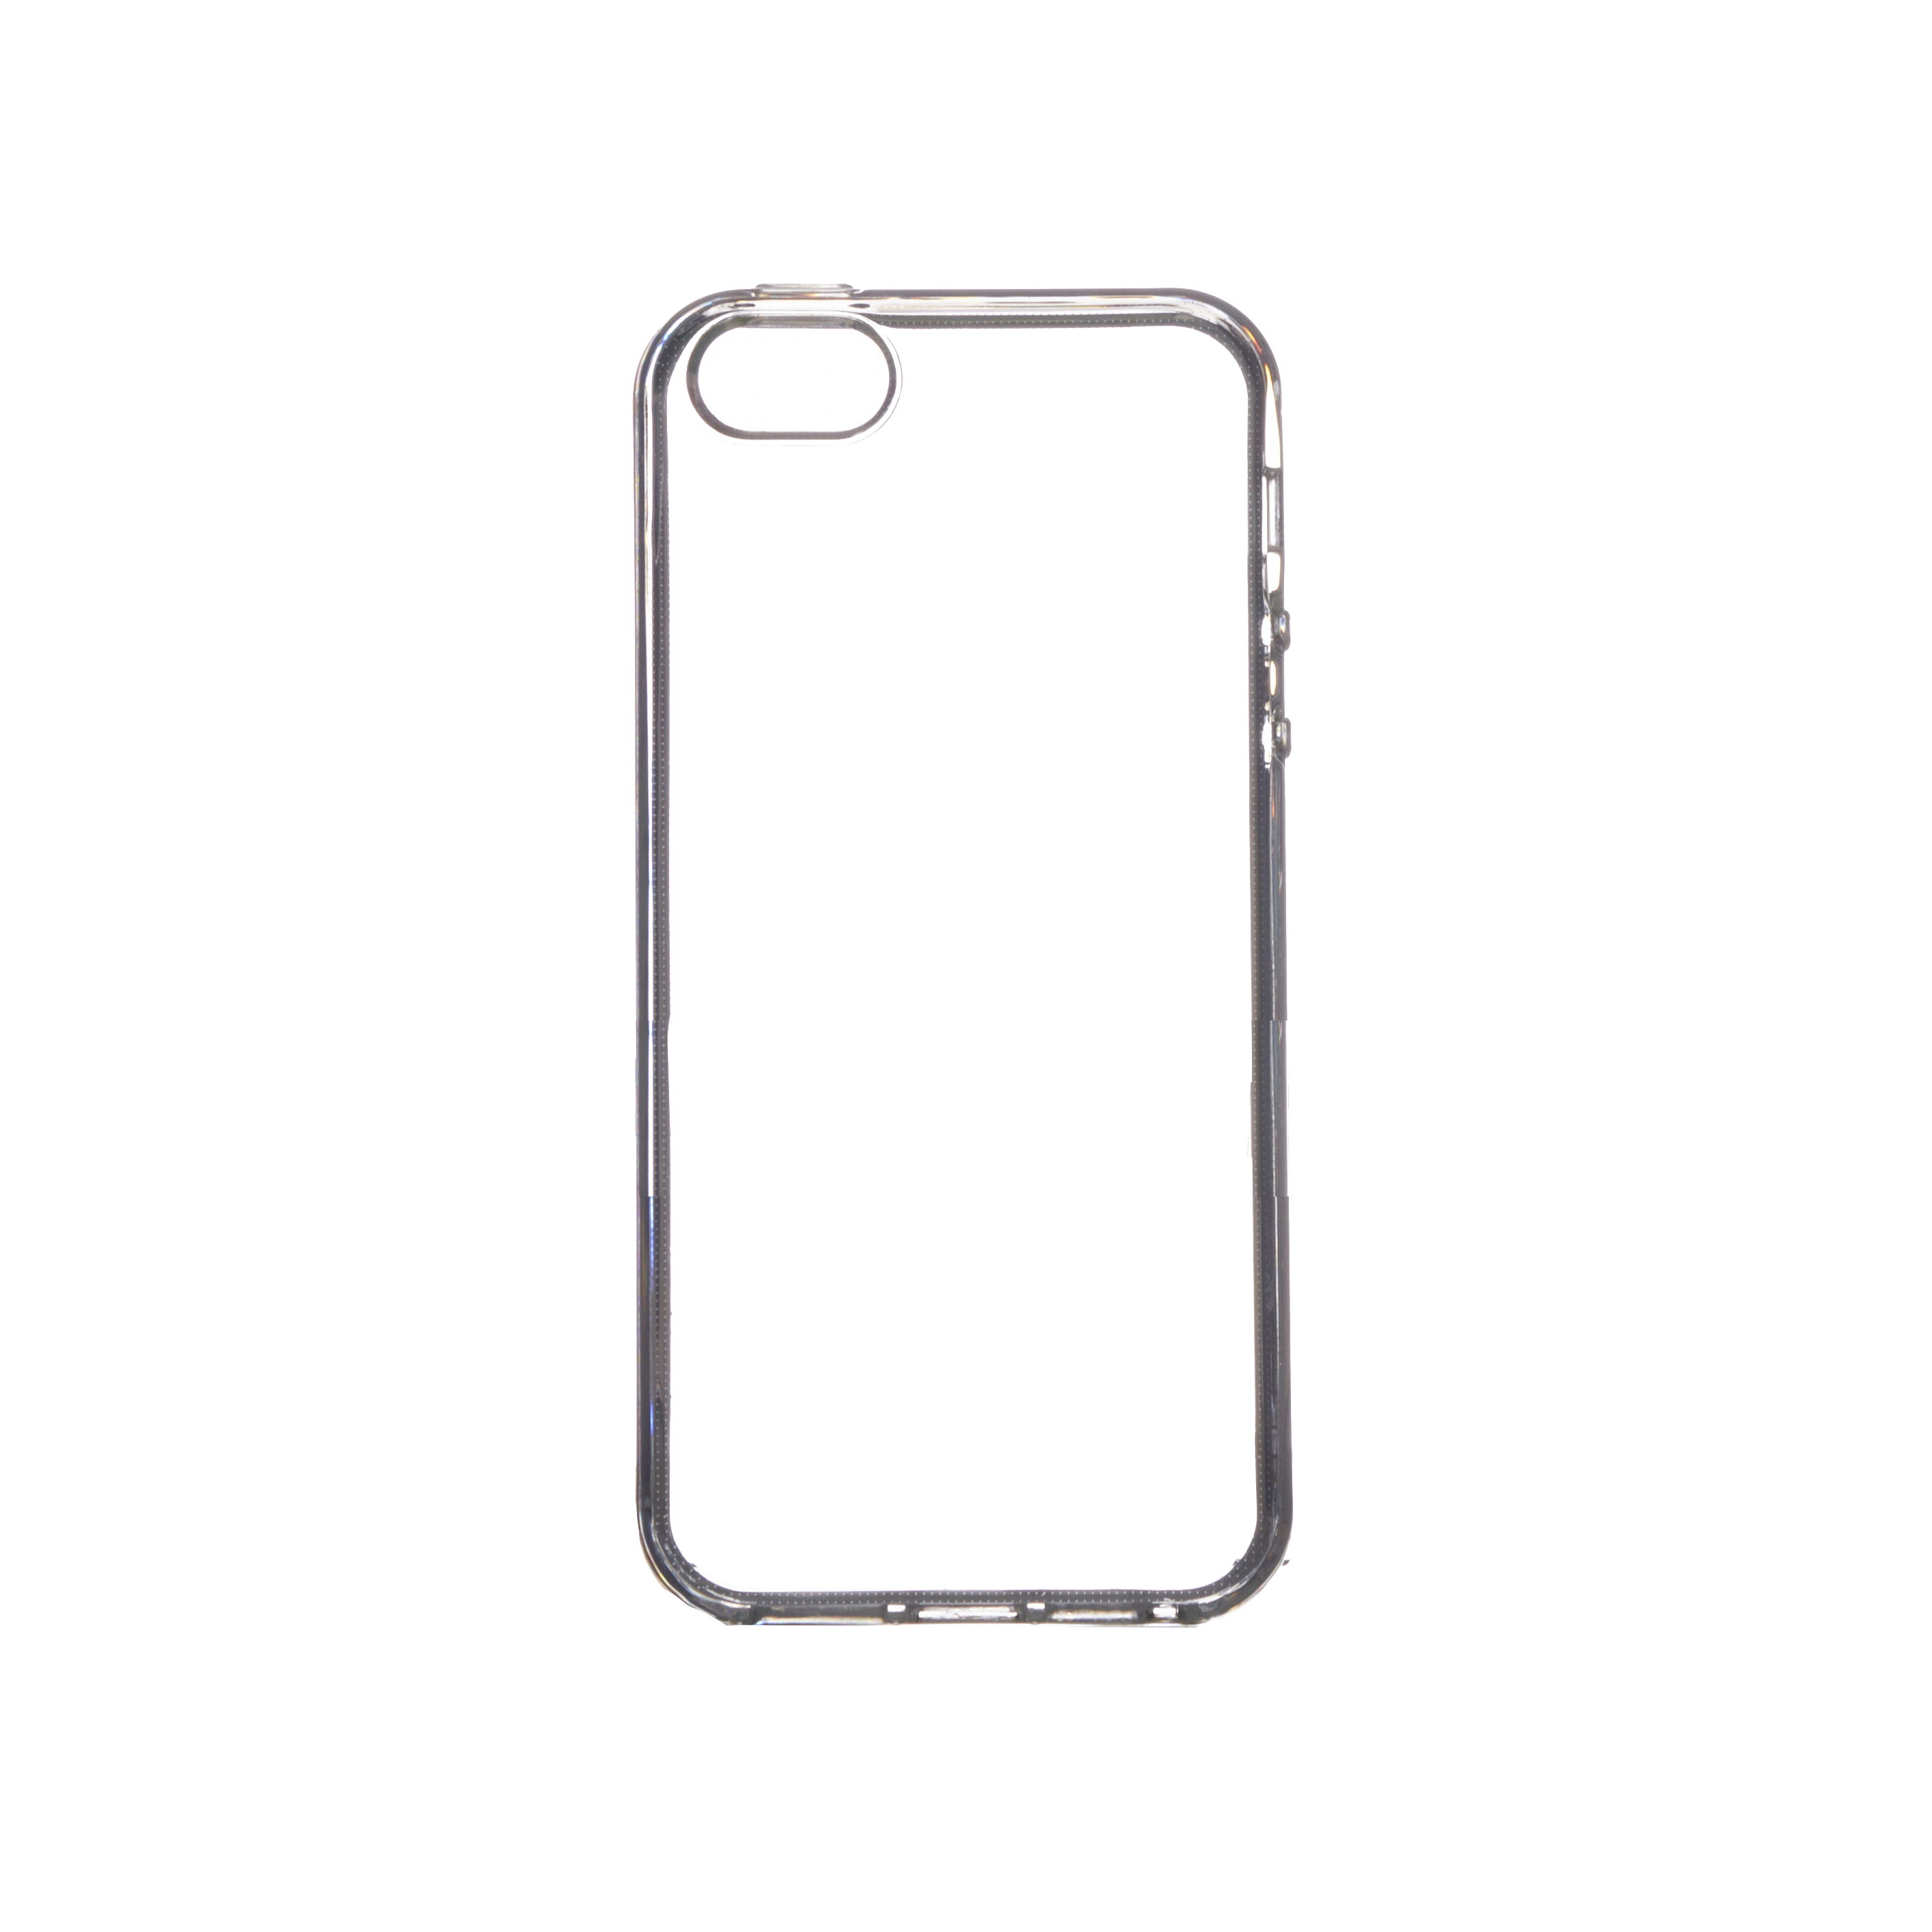 Tpu clear solid for iphone 5/5s/5se